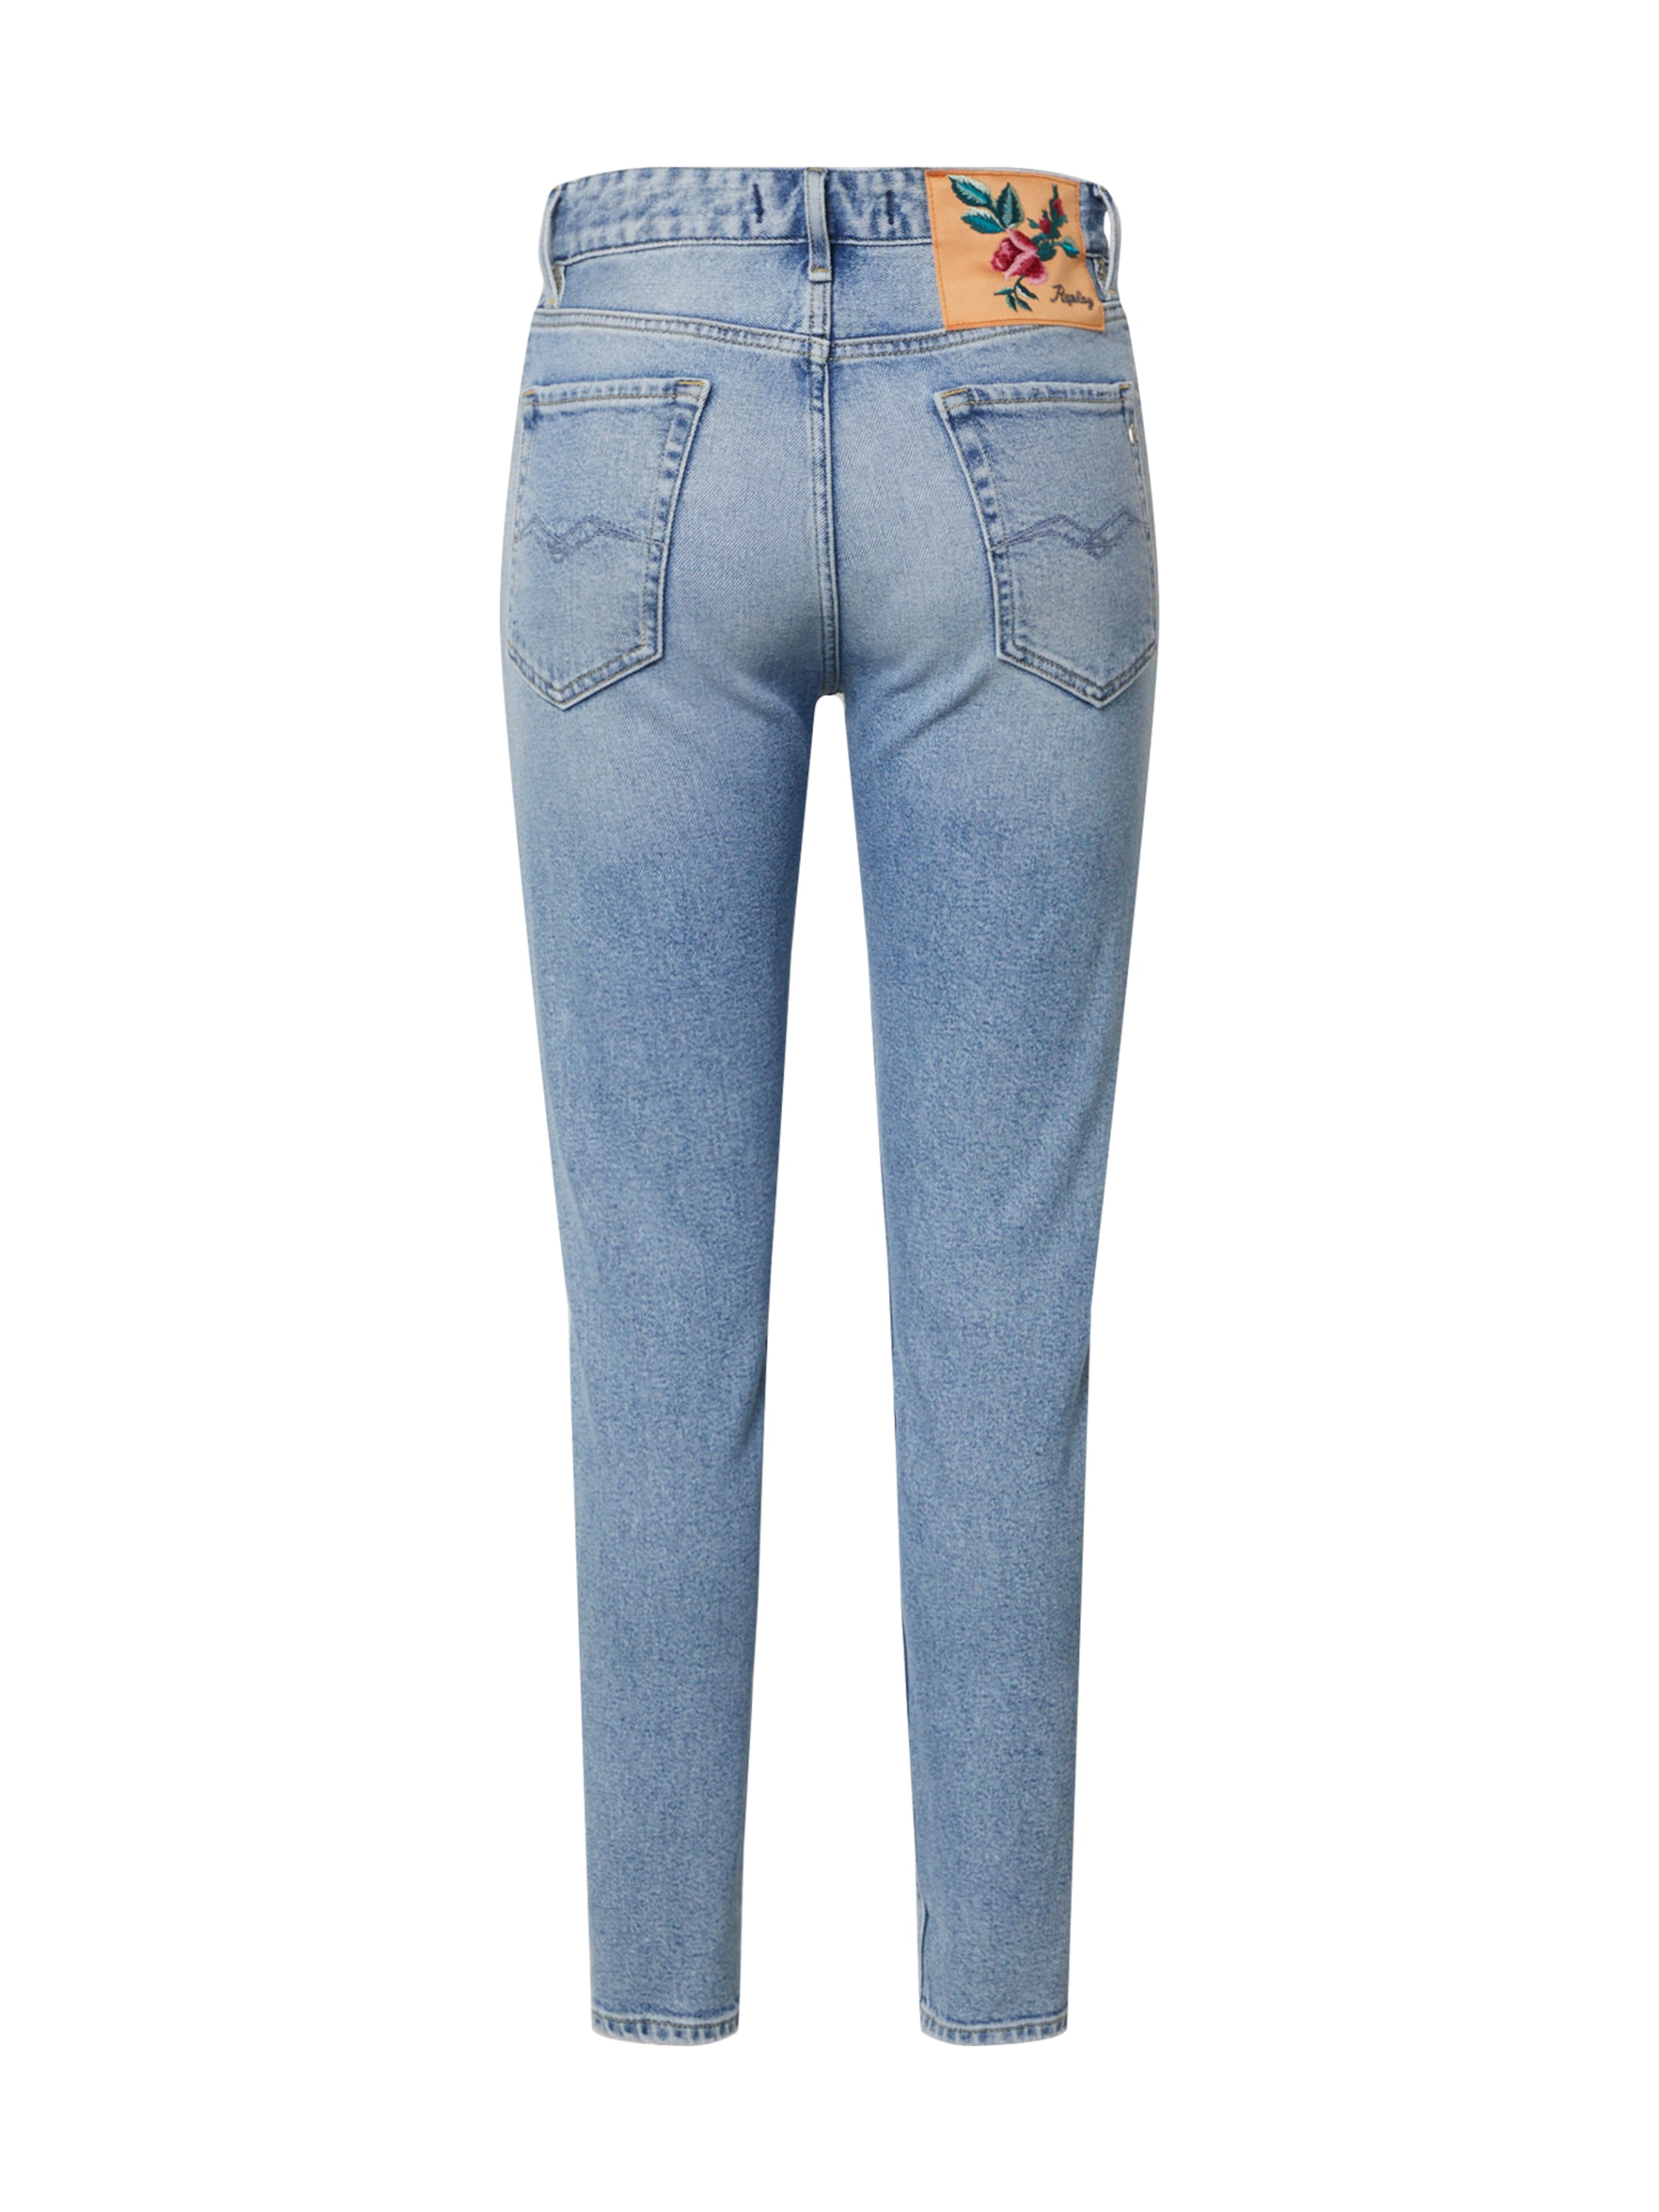 REPLAY Jeans Marty in Blau 